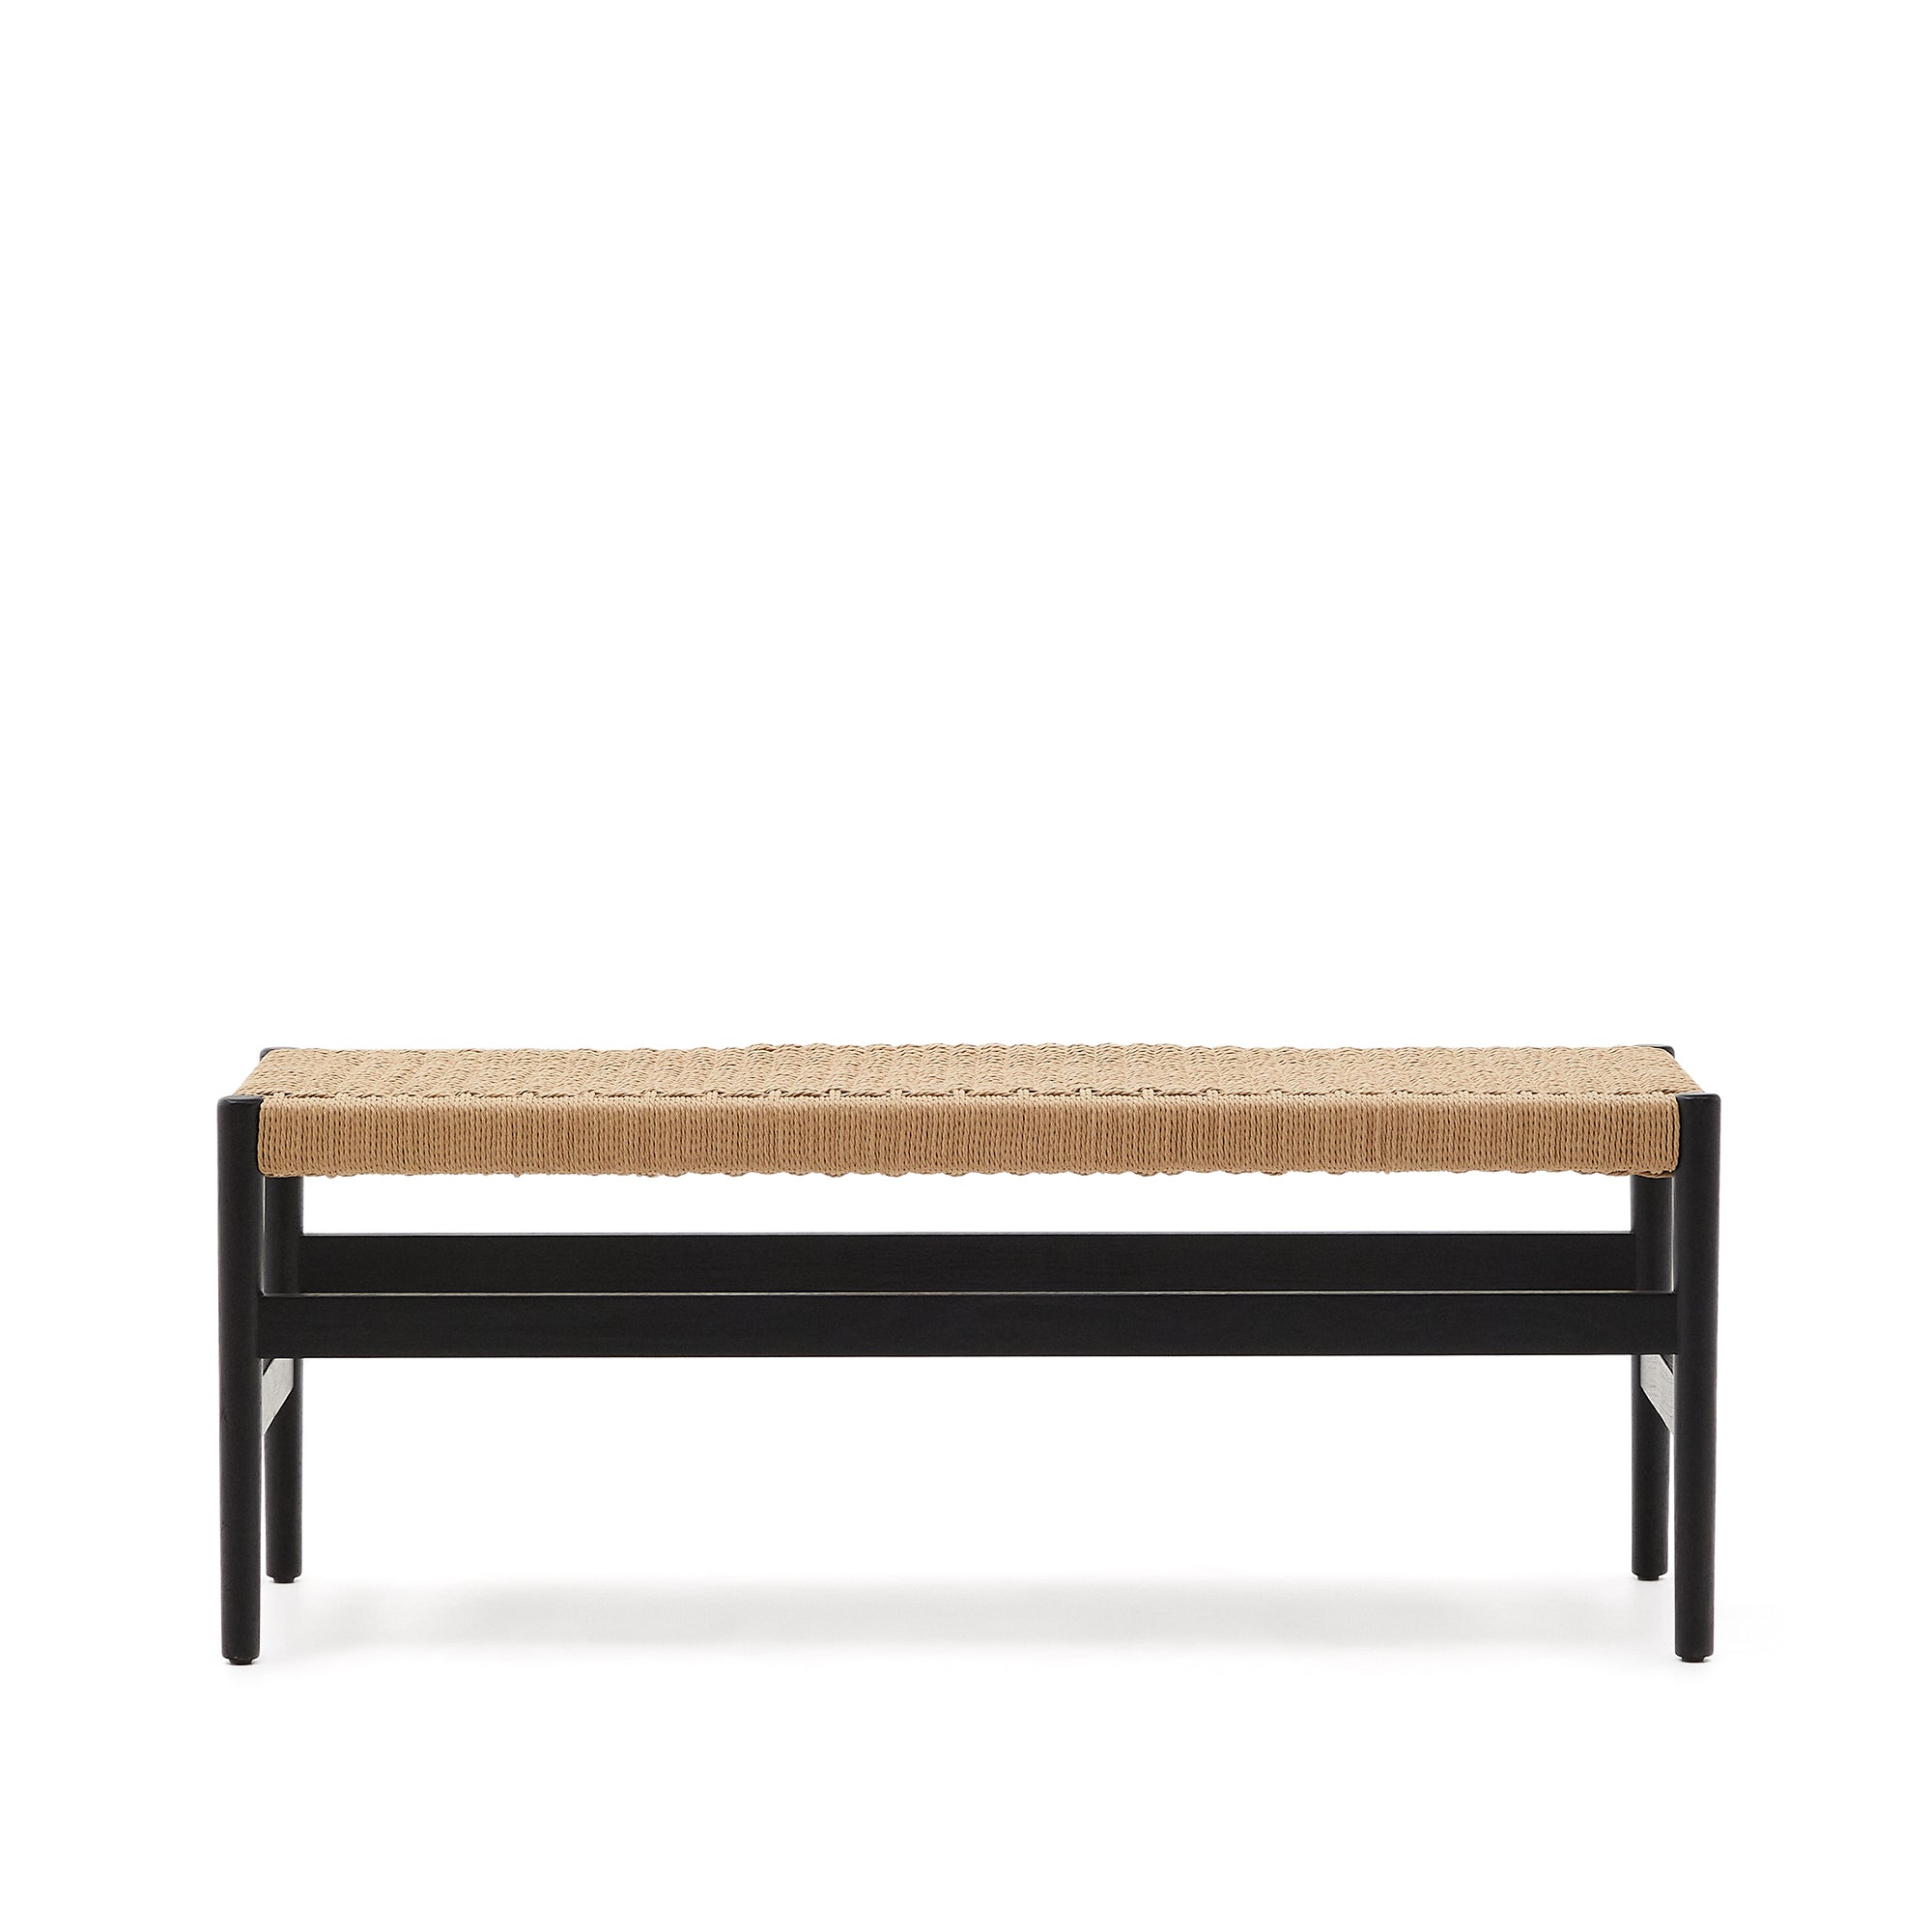 Zaide bench, solid oak, black finish and rope seat, 120 cm, 100% FSC